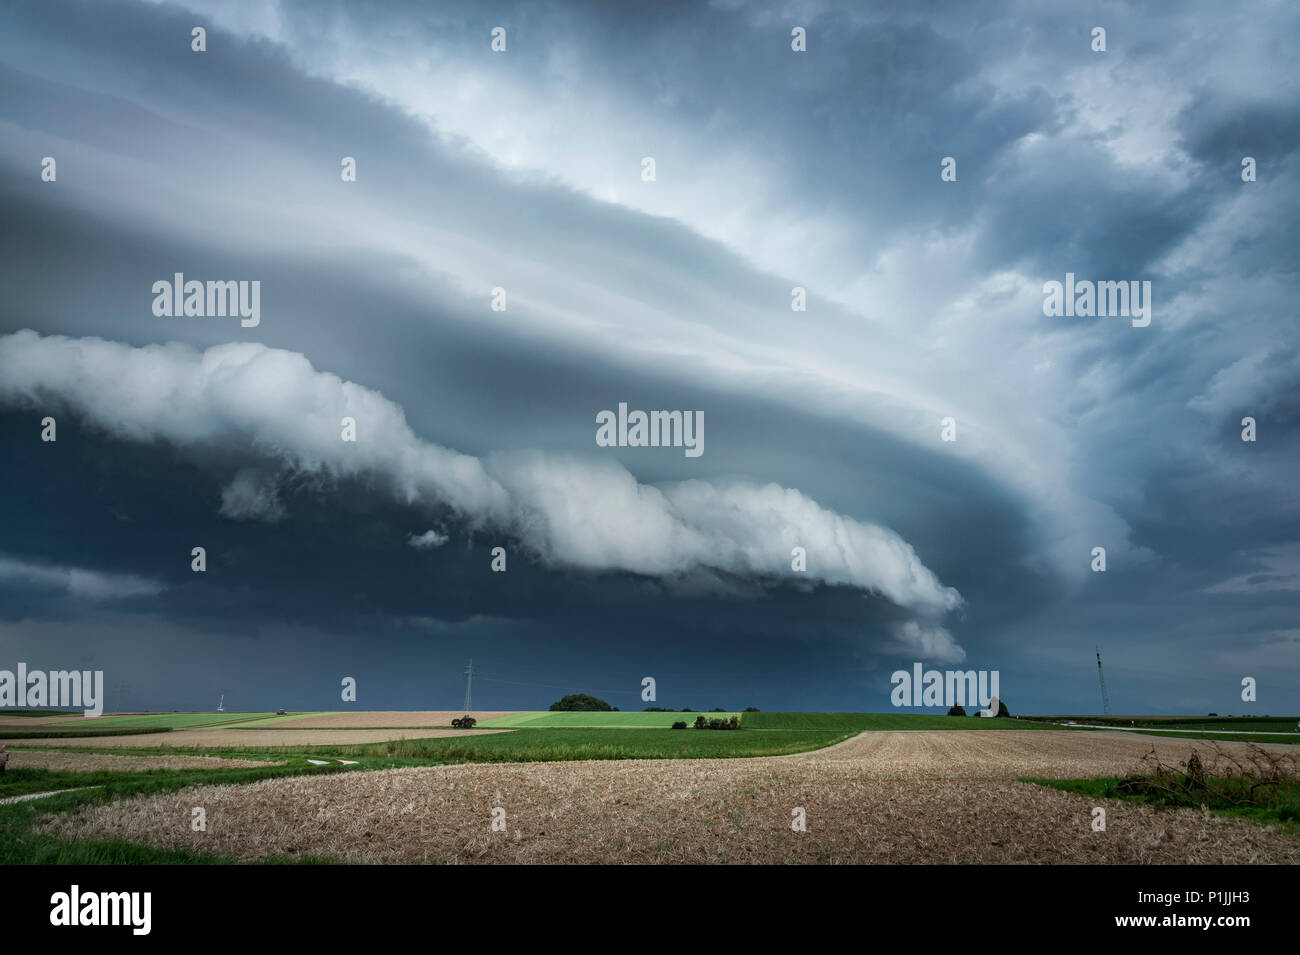 Well-defined shelf cloud with gust front of a supercell thunderstorm near Regensburg, Bavaria, Germany Stock Photo